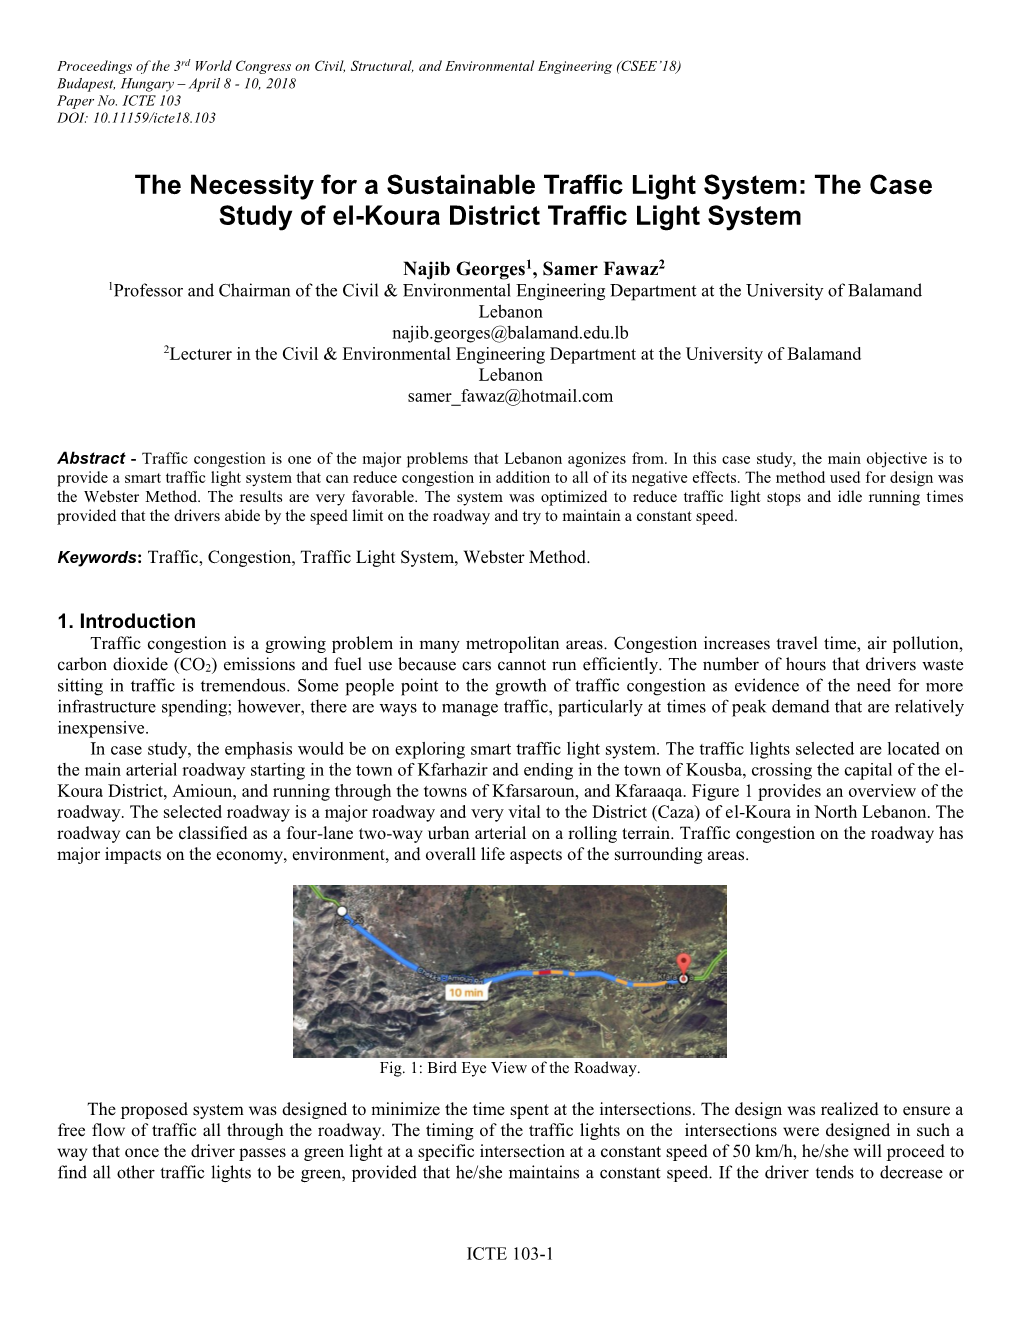 The Necessity for a Sustainable Traffic Light System: the Case Study of El-Koura District Traffic Light System